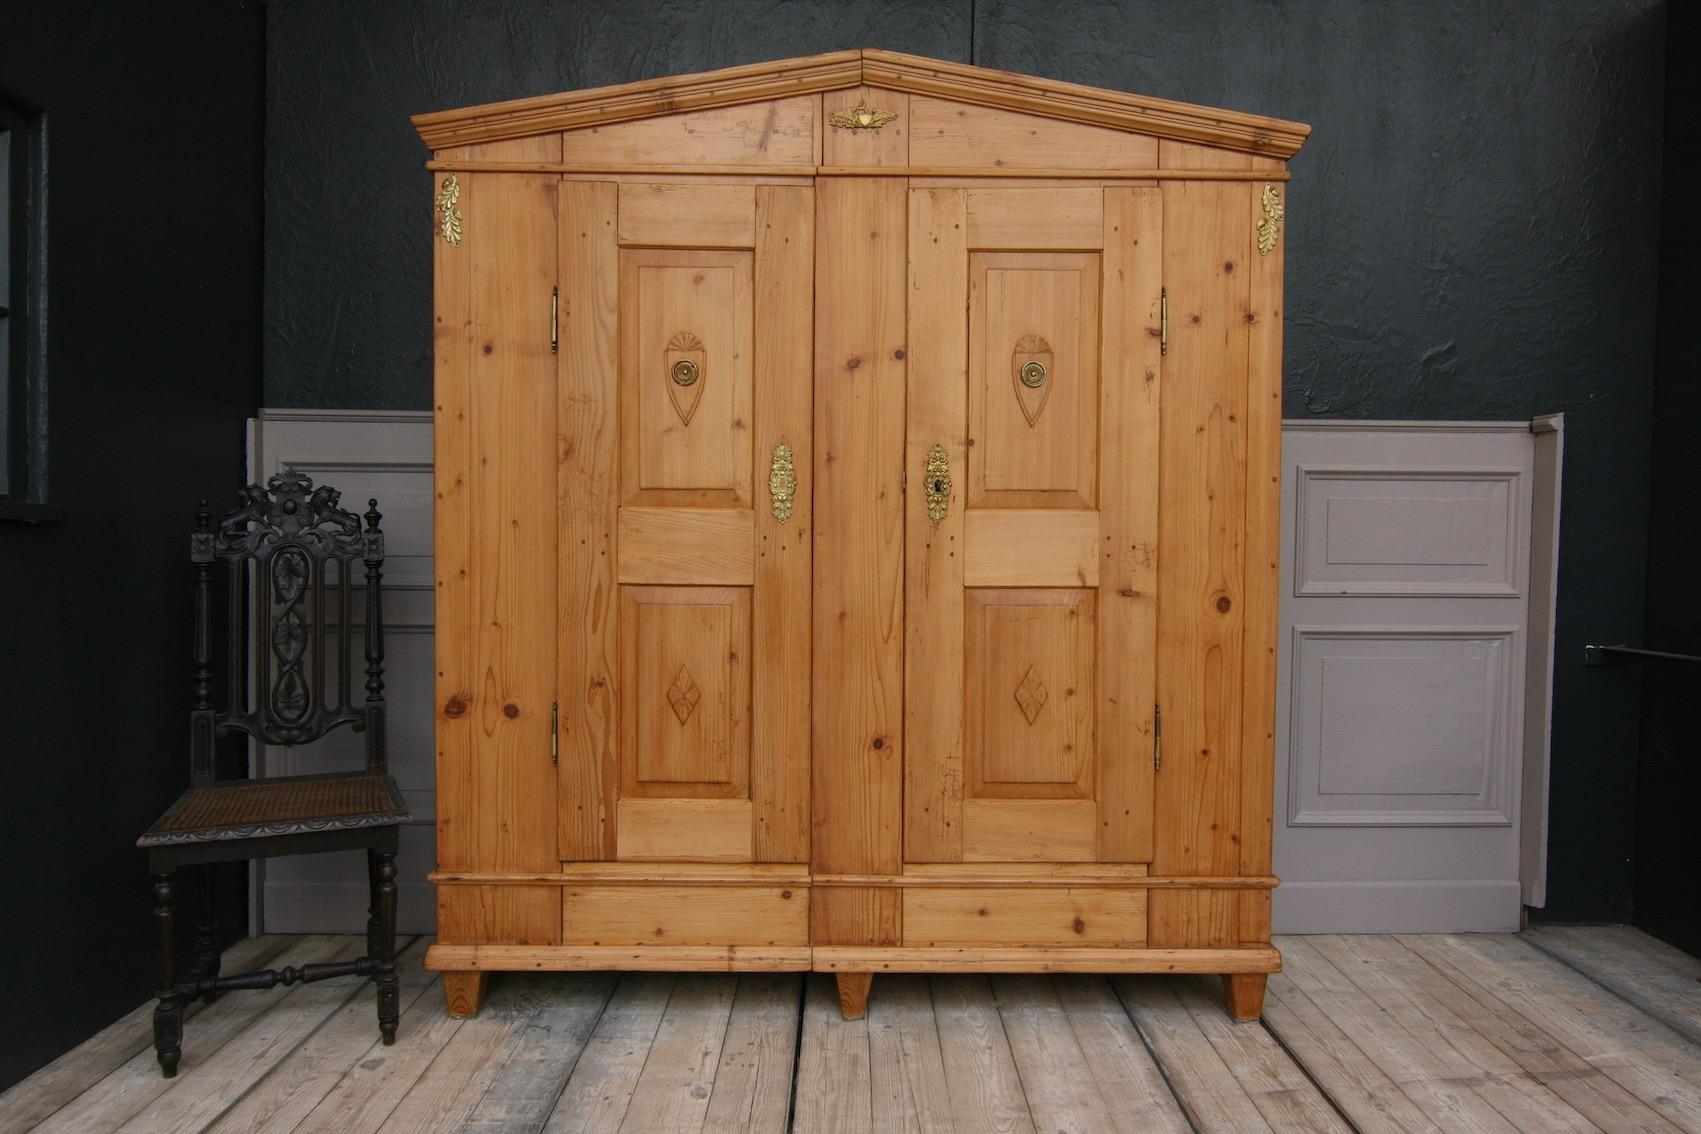 An antique classicist cabinet from the early 19th century (Biedermeier period), made of solid softwood. Waxed.
Two-door, divisible body with triangular gable standing on pointed feet.
Equipped with 3 shelves inside.